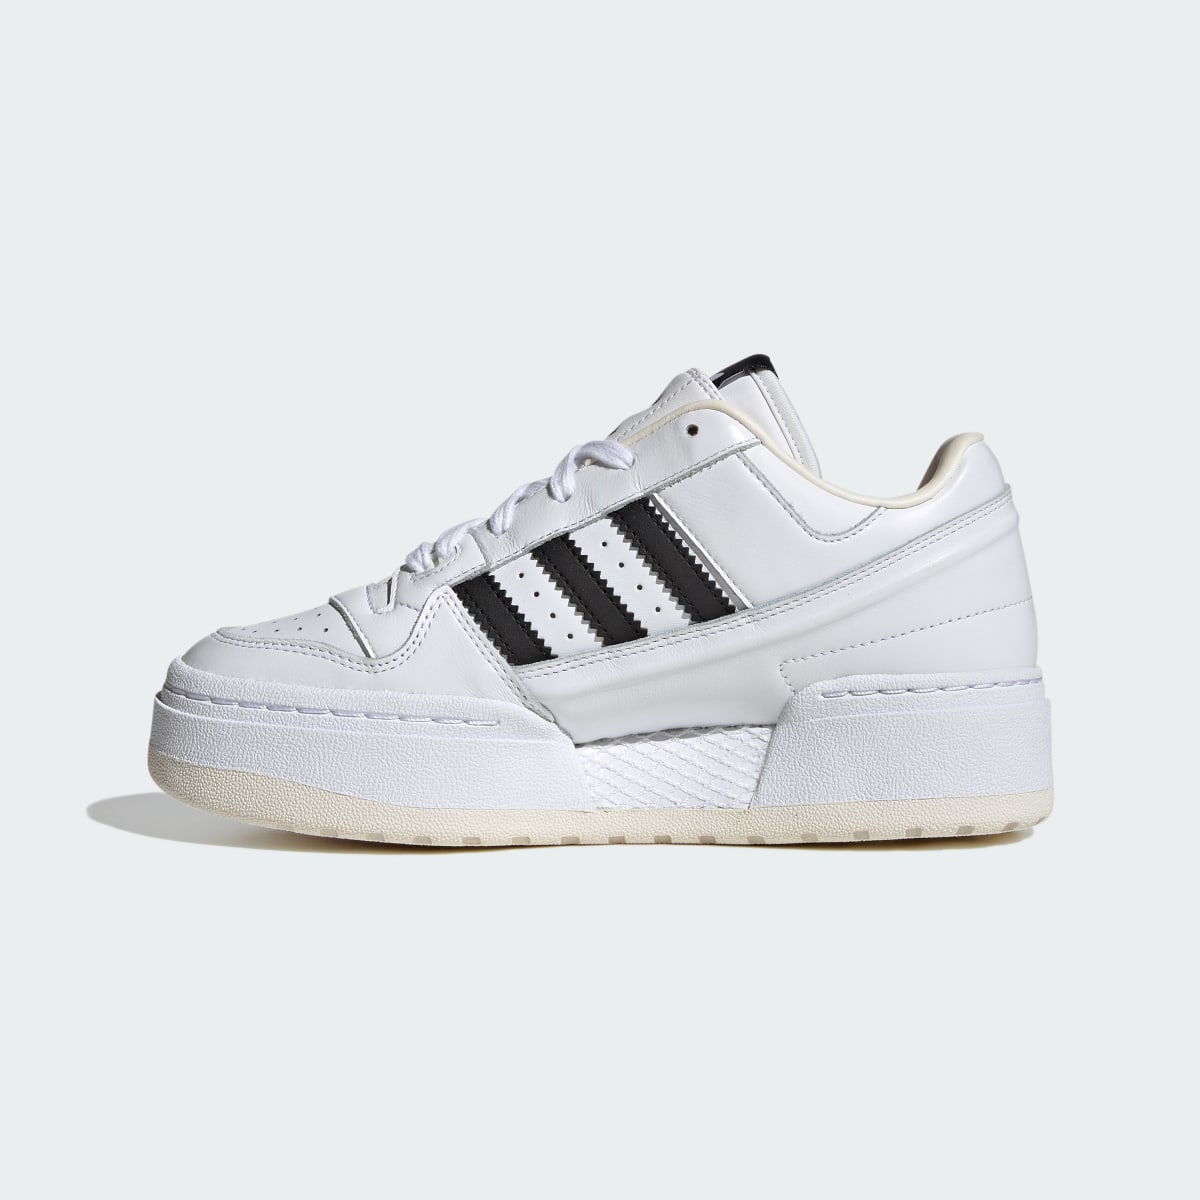 Adidas Chaussure Forum XLG. 7